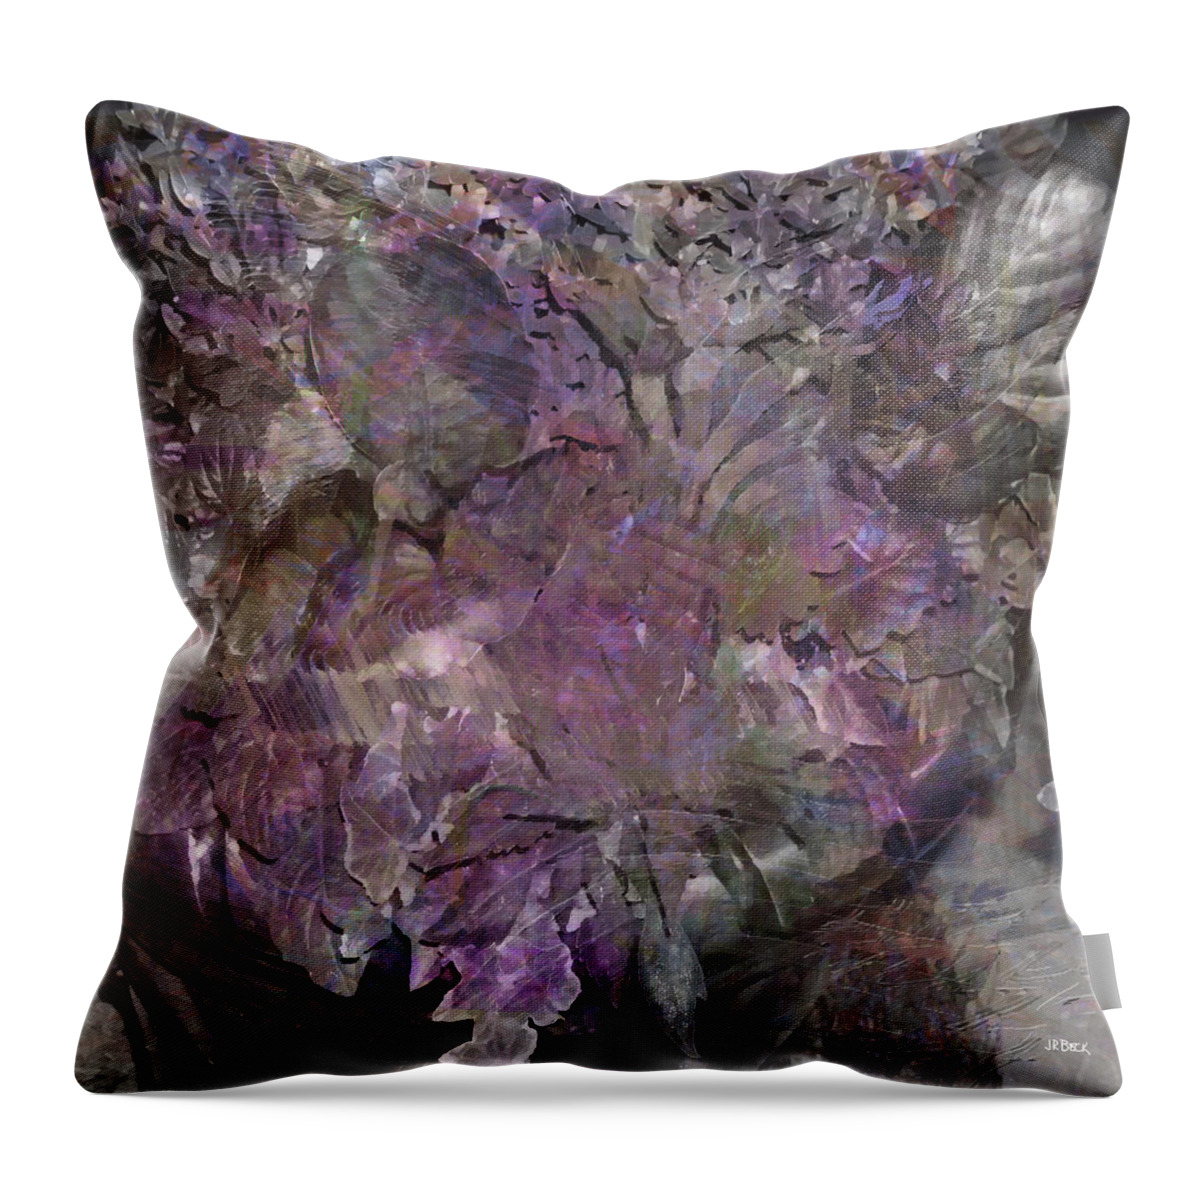 Petal To The Metal Throw Pillow featuring the digital art Petal To The Metal - Square Version by Studio B Prints